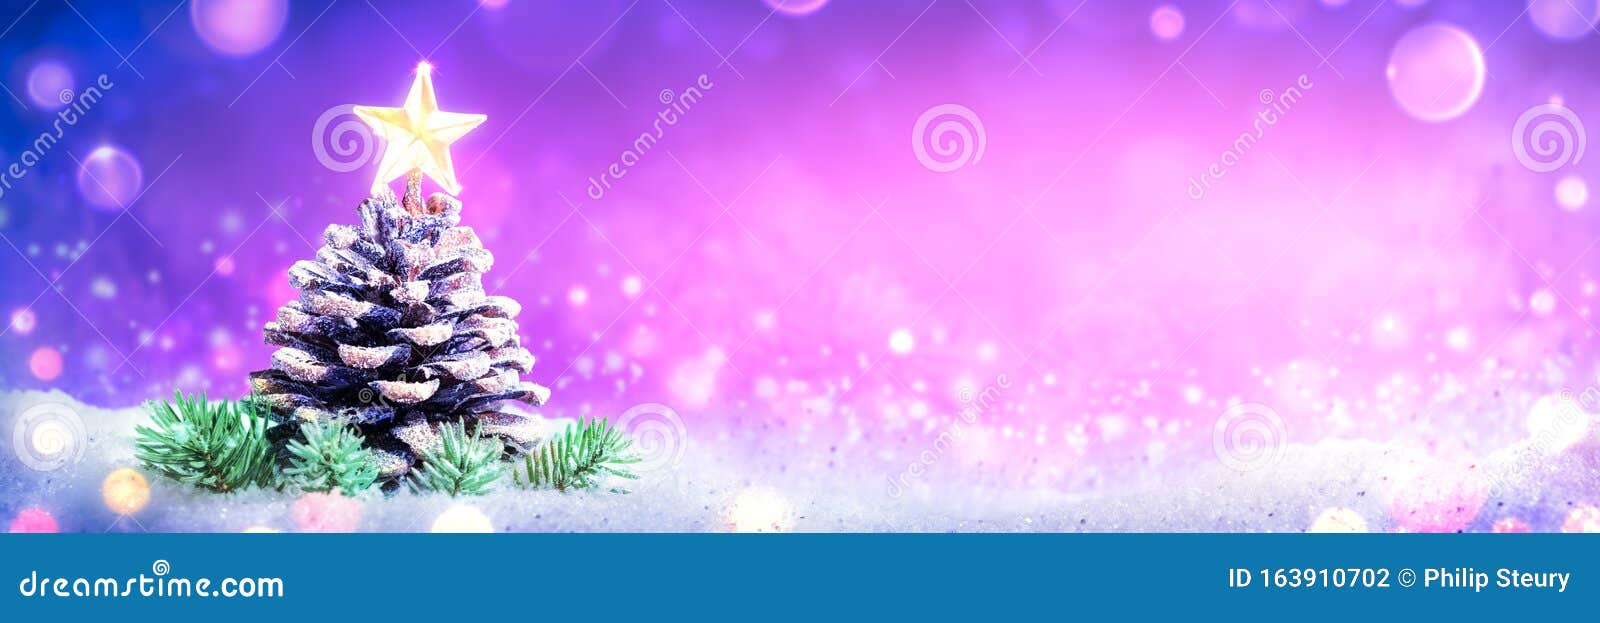 Pine Cone Decorated Like Xmas Tree On Snow With Bright Shining Star Stock Photo Image Of Shiny Banner